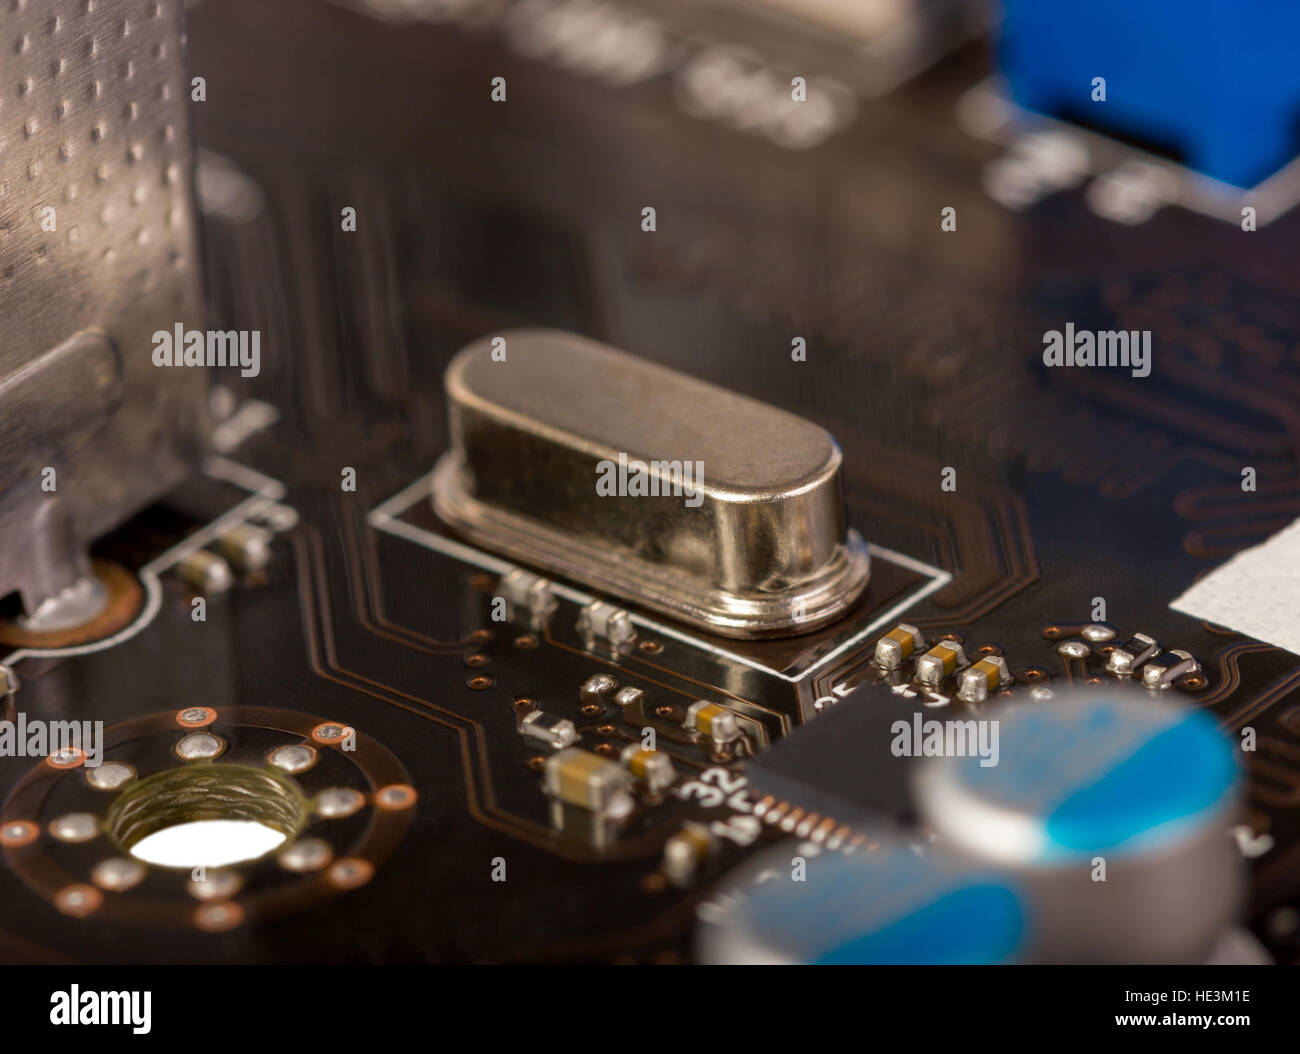 Electronic collection - fragment a computer PCB with SMD components Stock Photo